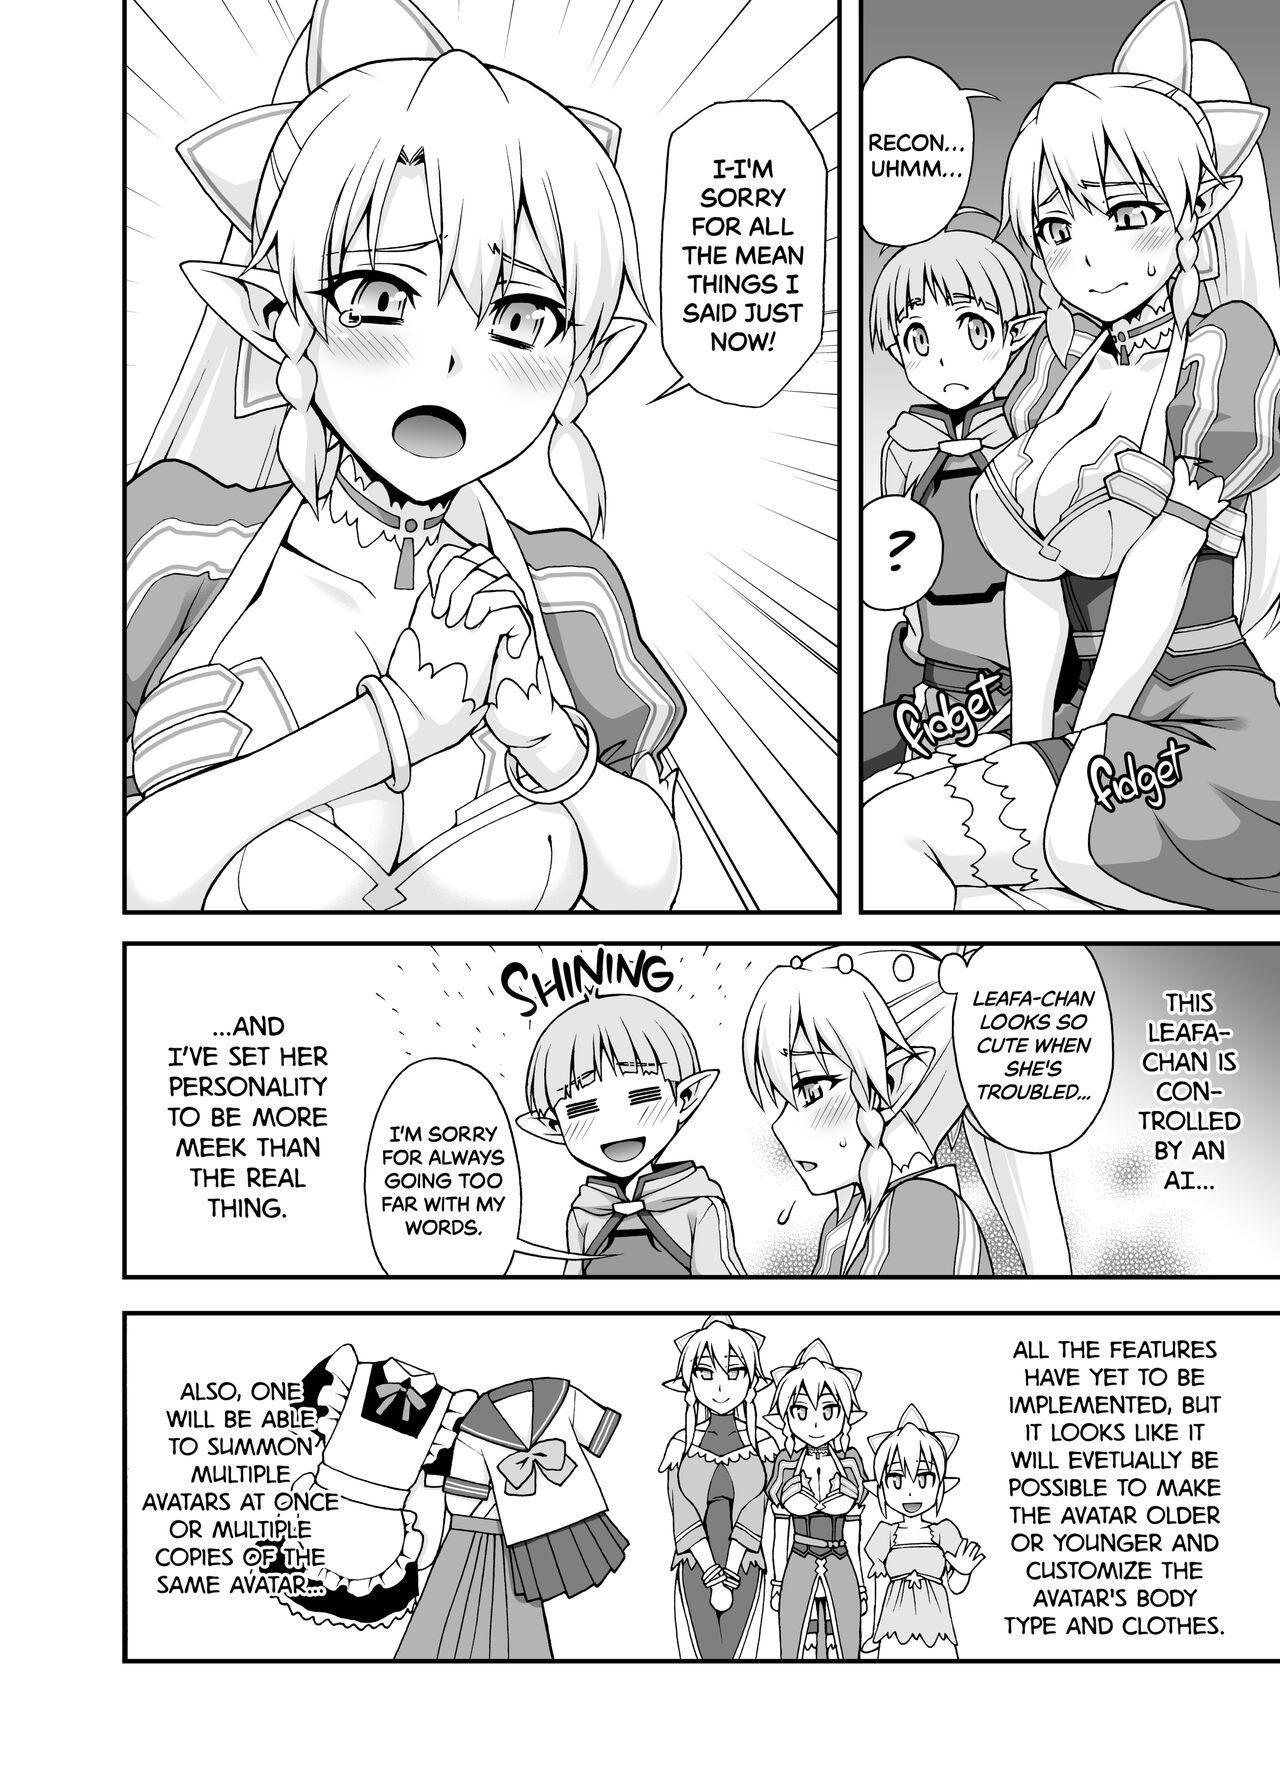 Throatfuck Delphinium Madonna 2 - Sword art online Family Roleplay - Page 7